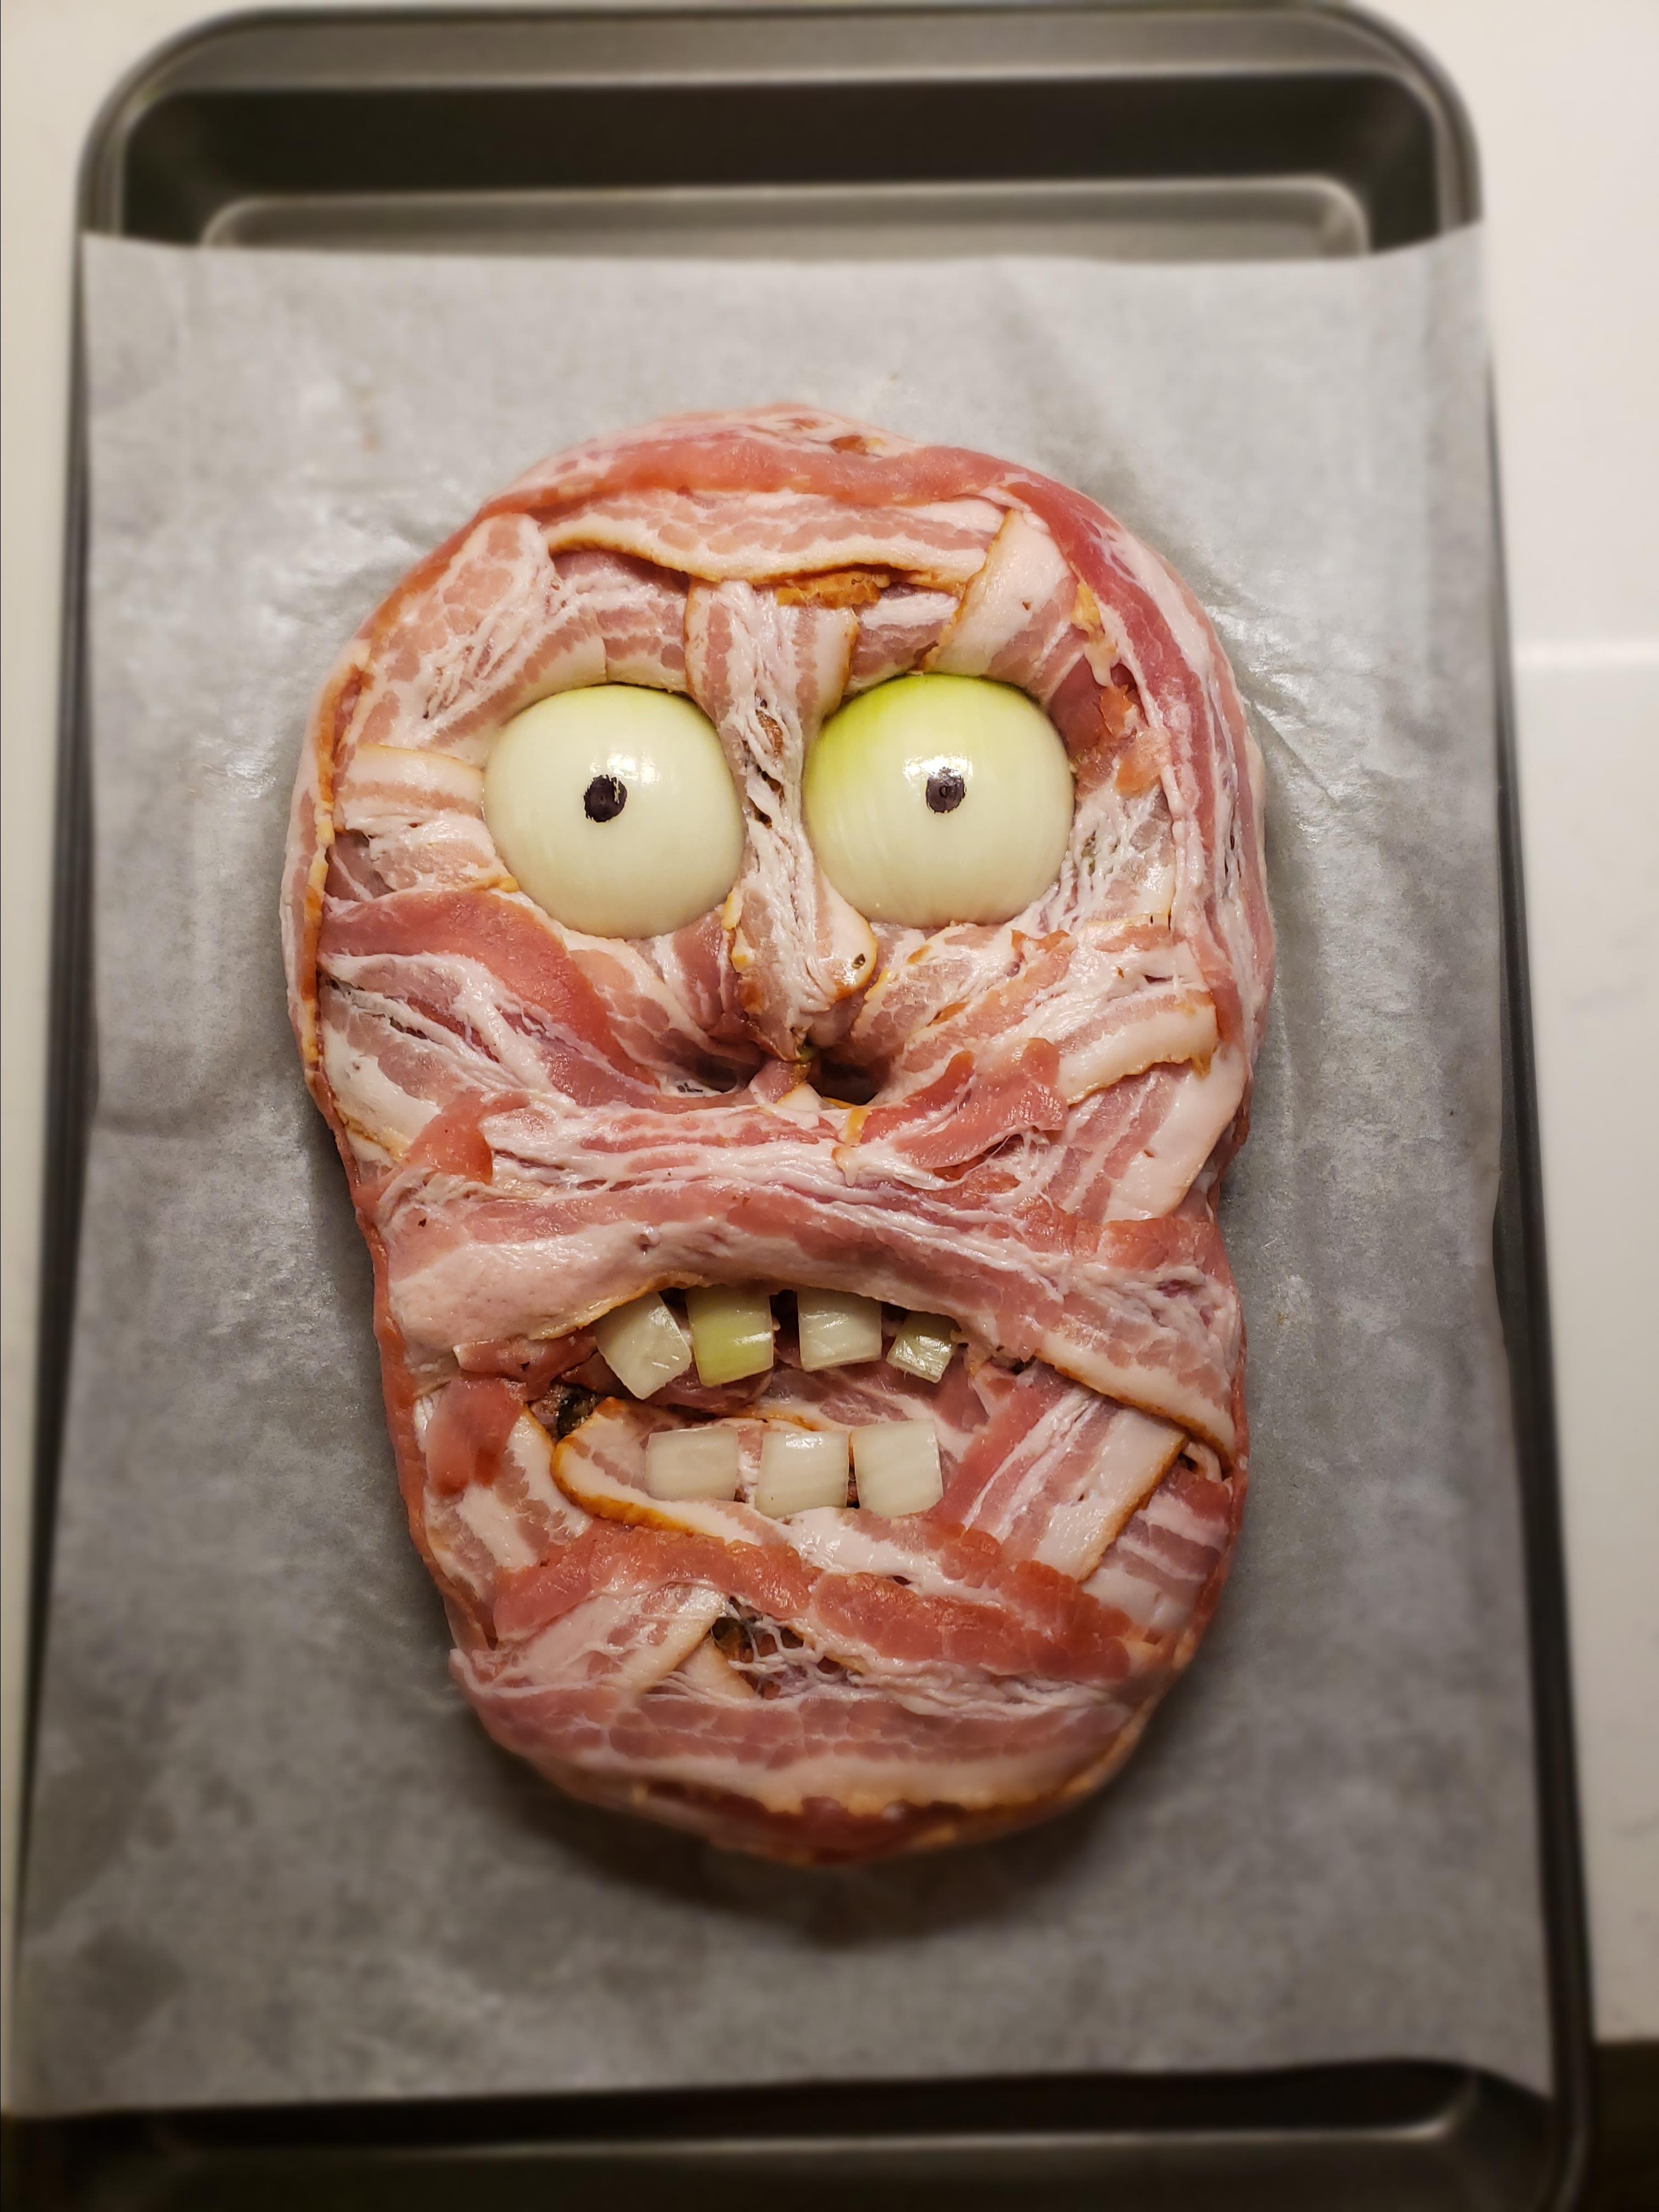 Chef John's Zombie Meatloaf 